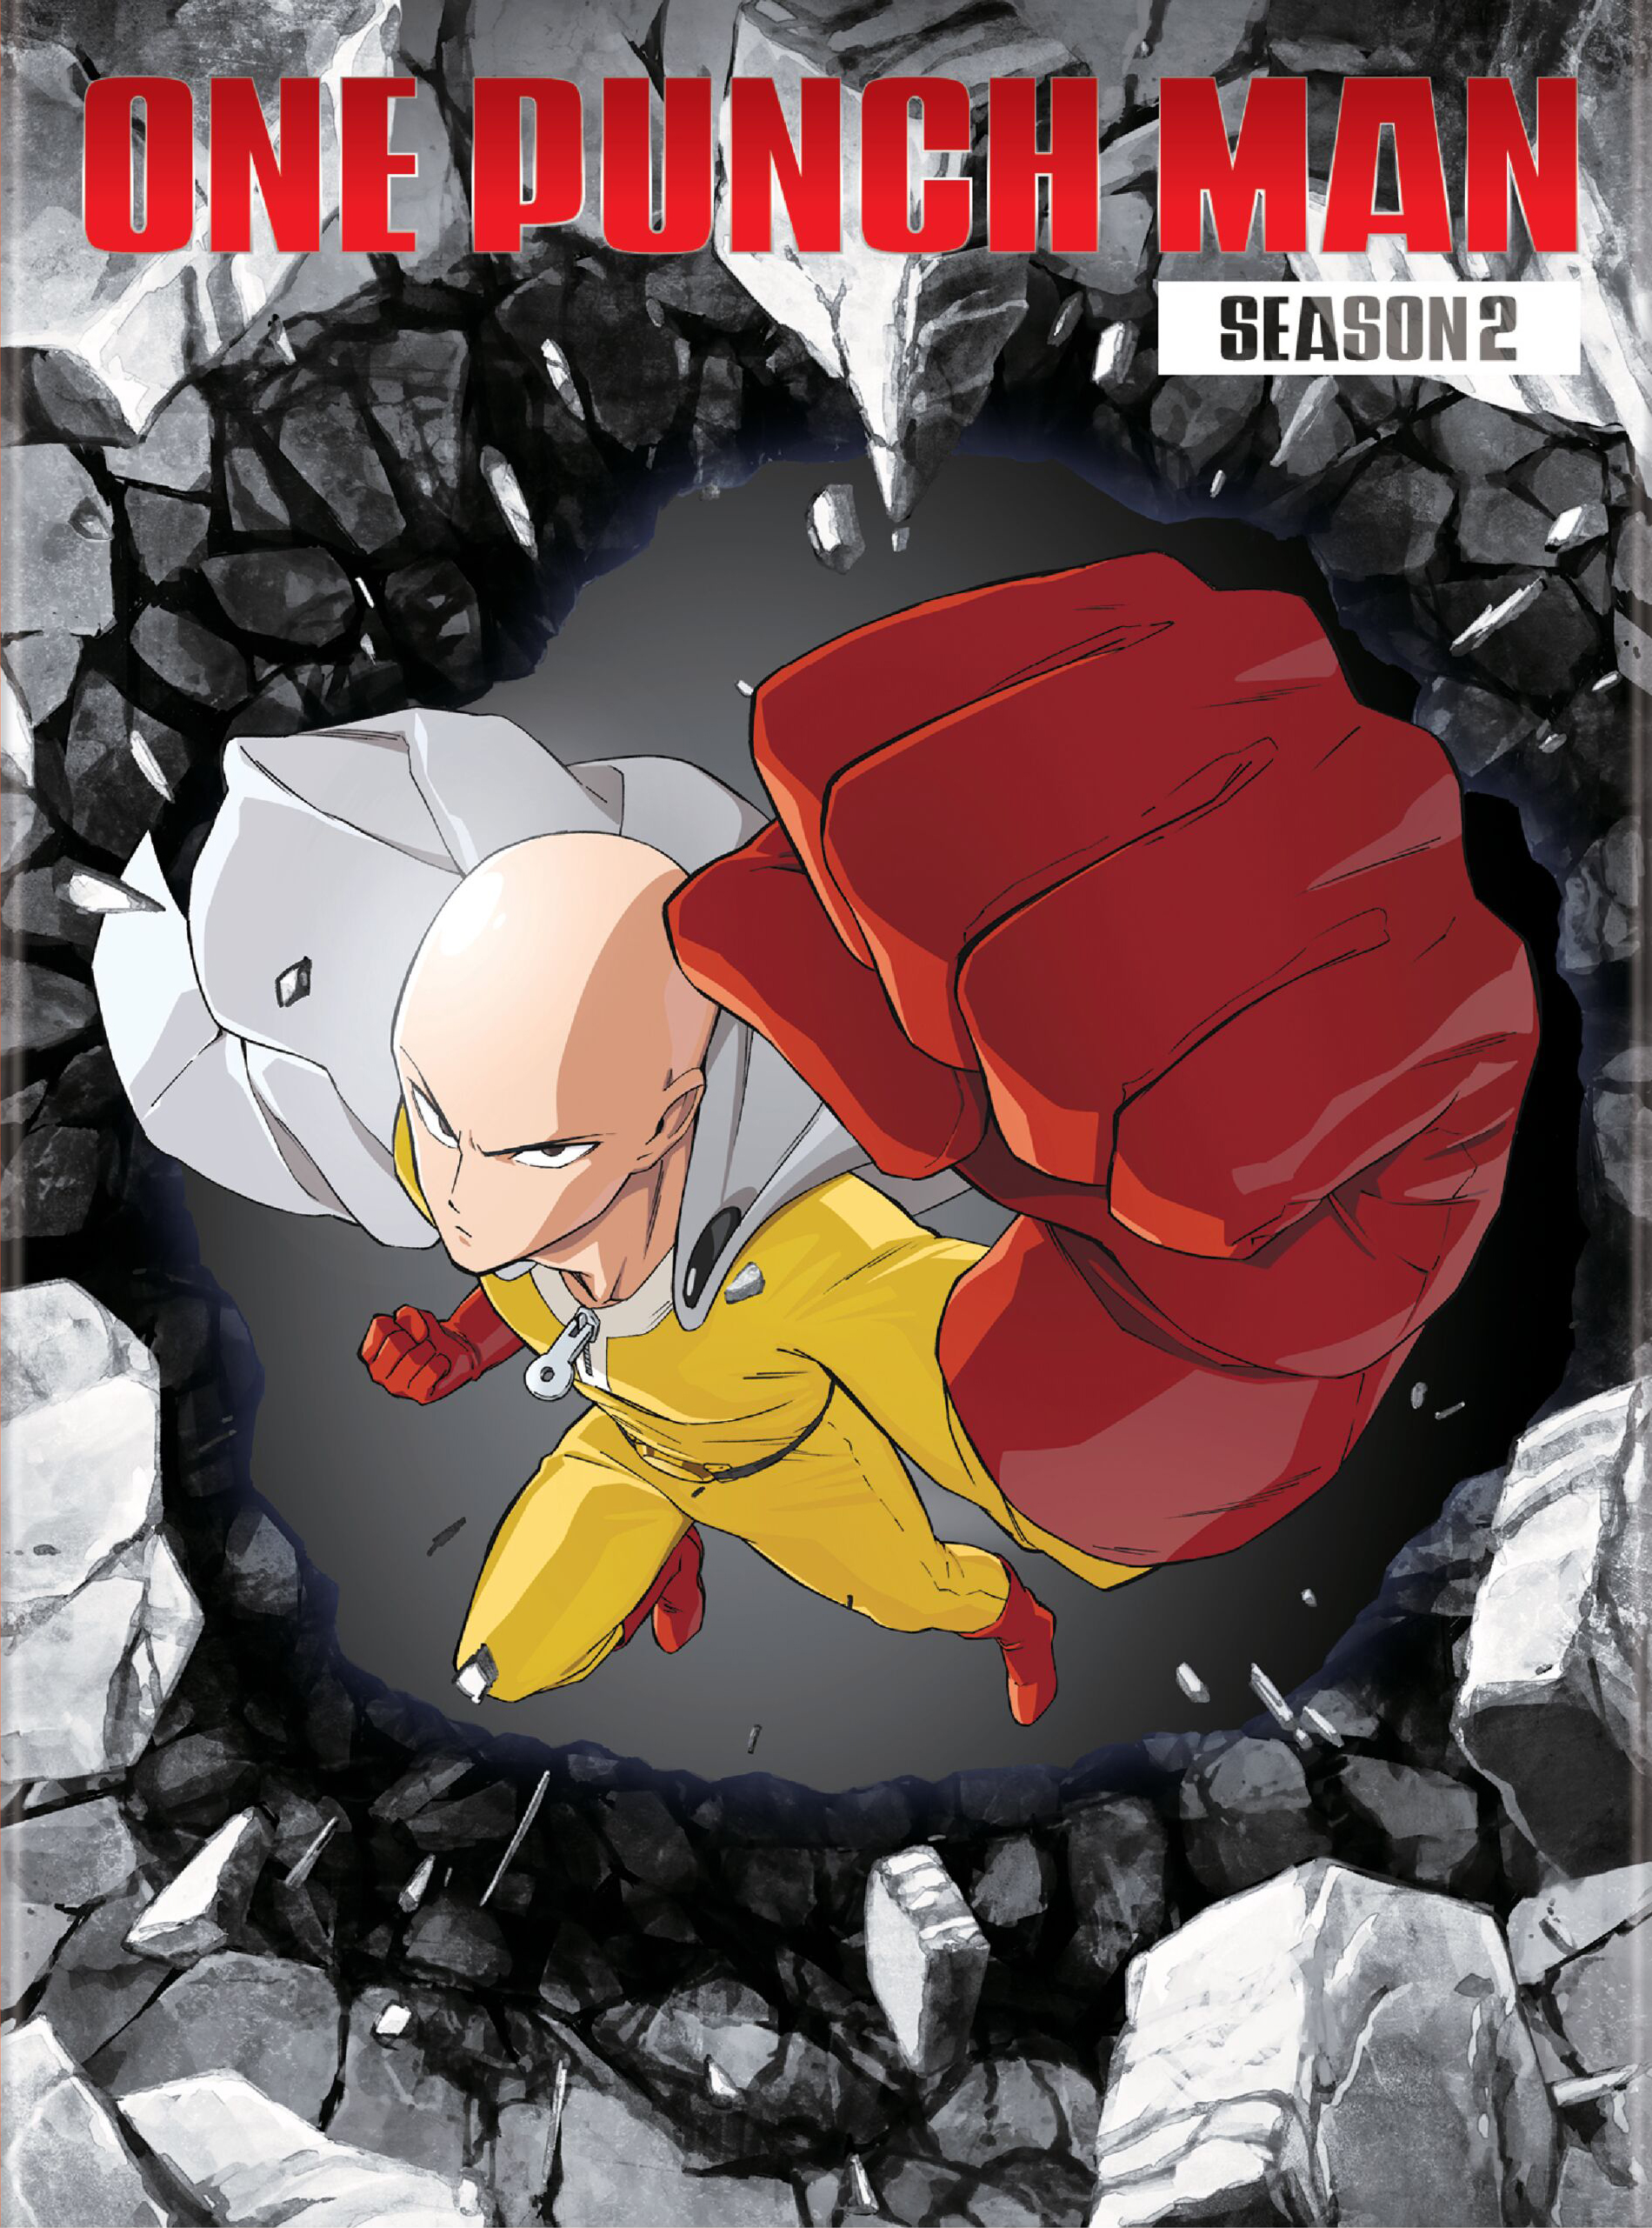 ONE-PUNCH MAN 02